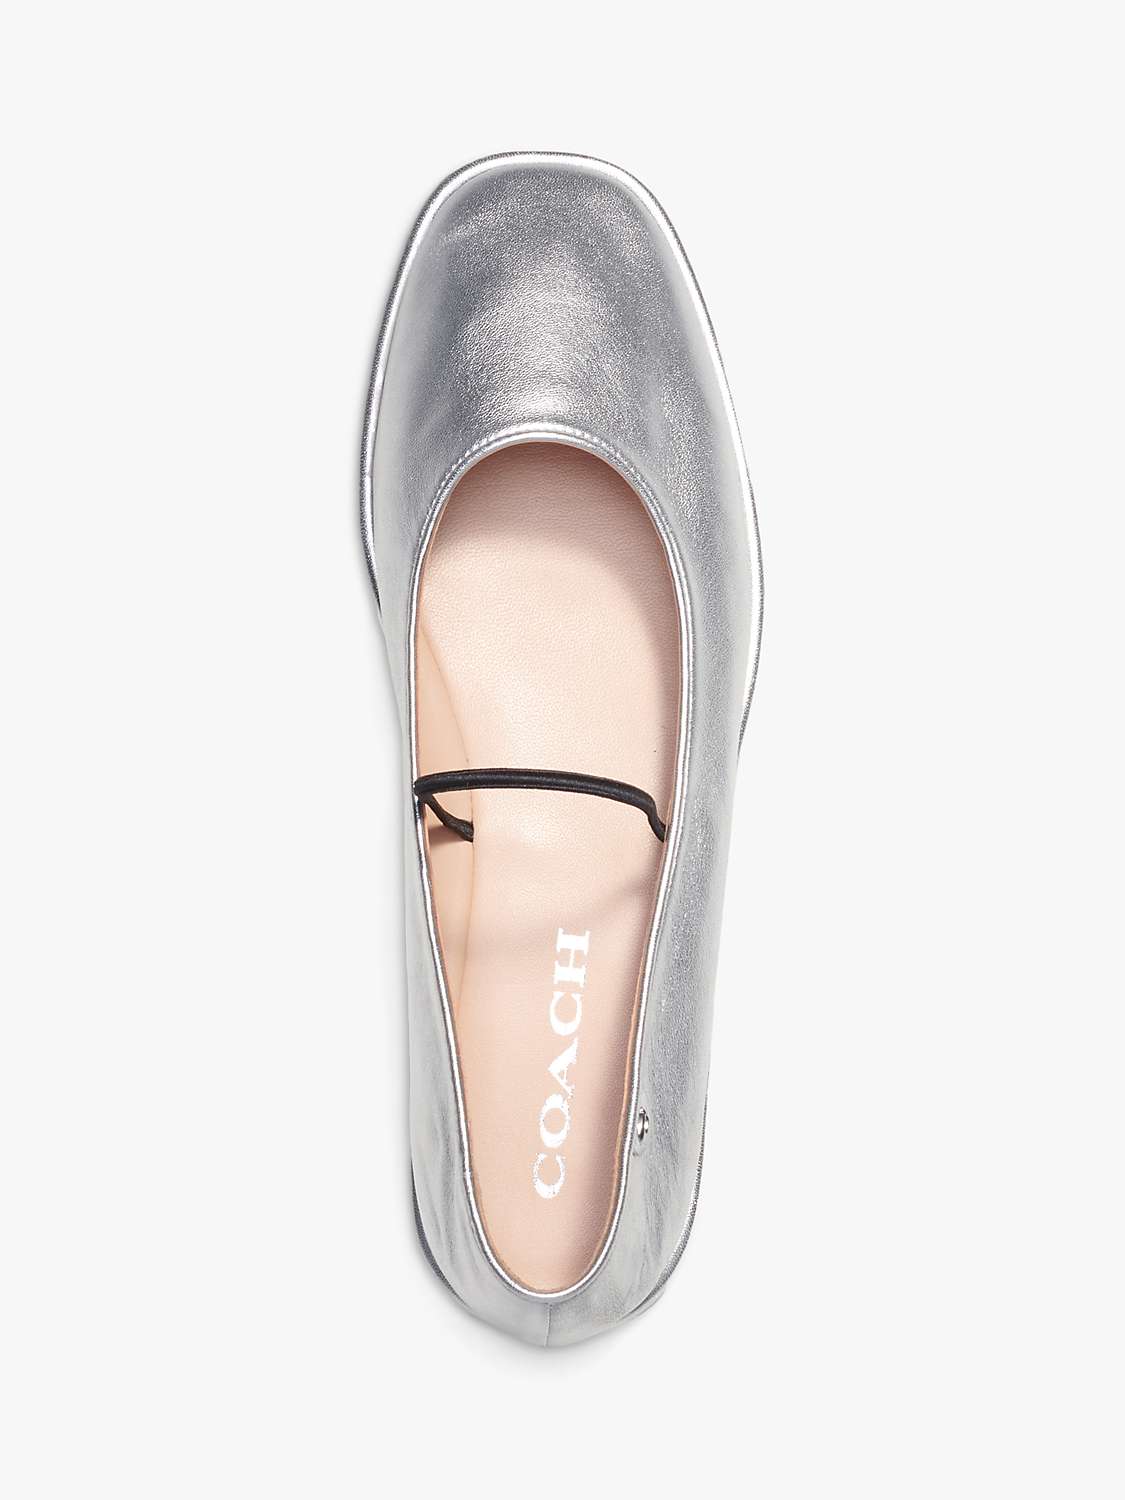 Buy Coach Emilia Leather Mary Jane Pumps, Silver Online at johnlewis.com